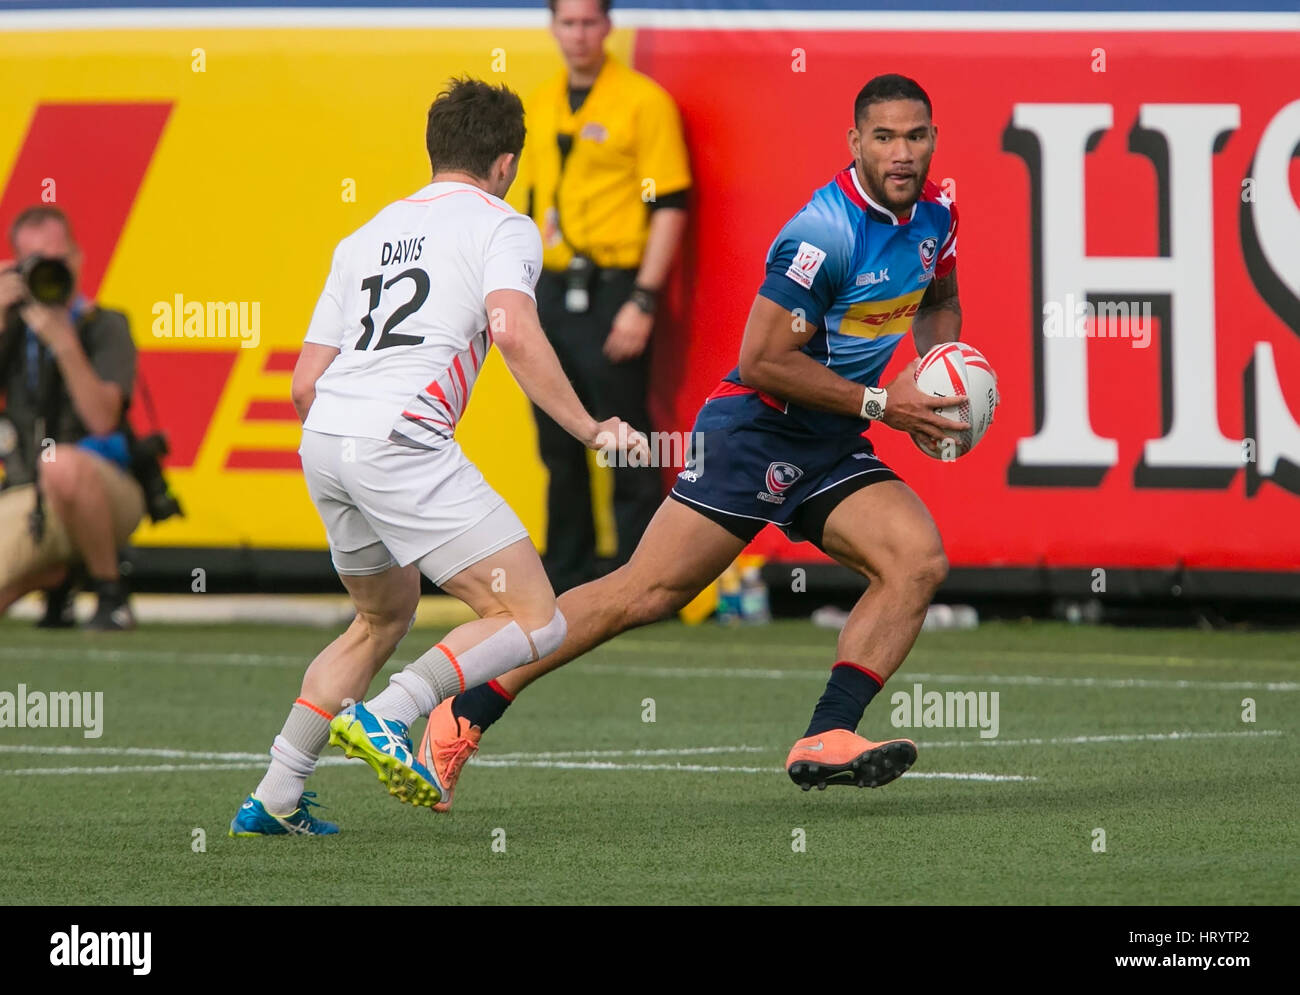 Las Vegas, NV, USA. 4th Mar, 2017. Martin Iosefo #12 of USA in action during Pool B play of the rugby sevens match between the USA and England at Sam Boyd Stadium in Las Vegas, Nv. England defeated the US 24-17. Damon Tarver/Cal Sport Media/Alamy Live News Stock Photo